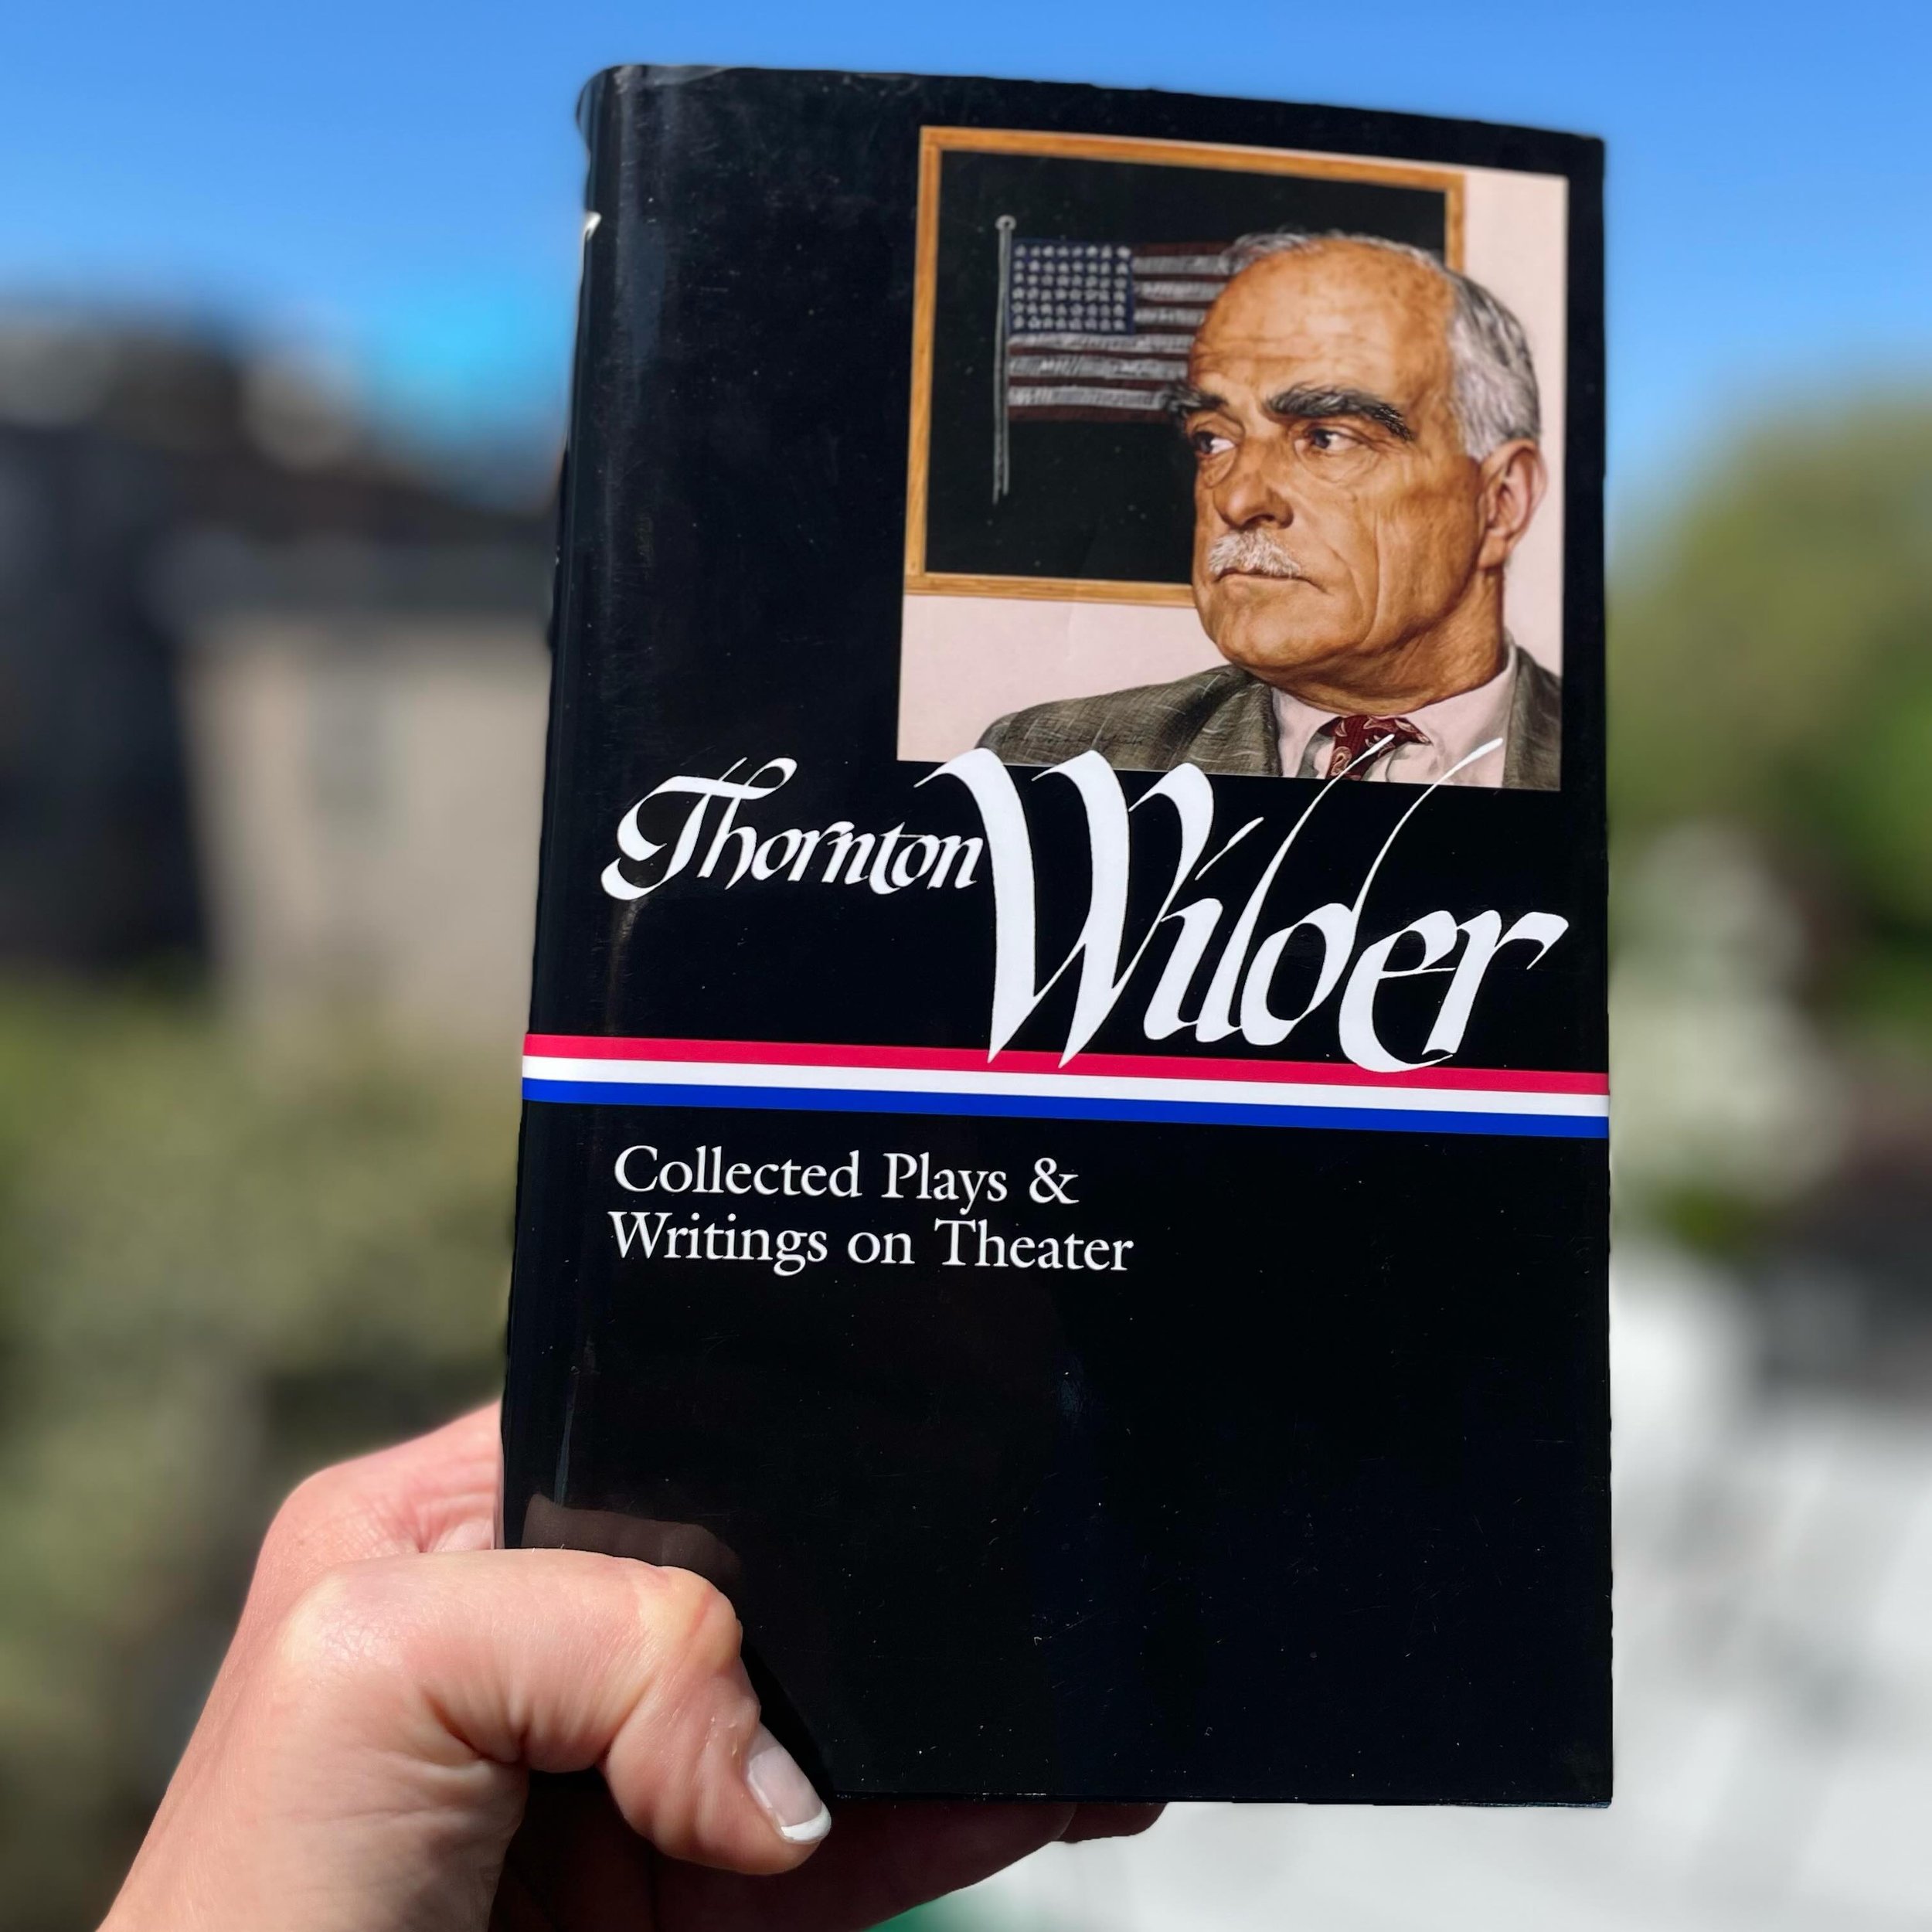 Our book of the month is the gorgeous volume @libraryofamerica THORTON WILDER: COLLECTED PLAYS &amp; WRITINGS ON THEATRE.

The most comprehensive one-volume edition of Thornton Wilder&rsquo;s work ever published, this compendium allows you to see the